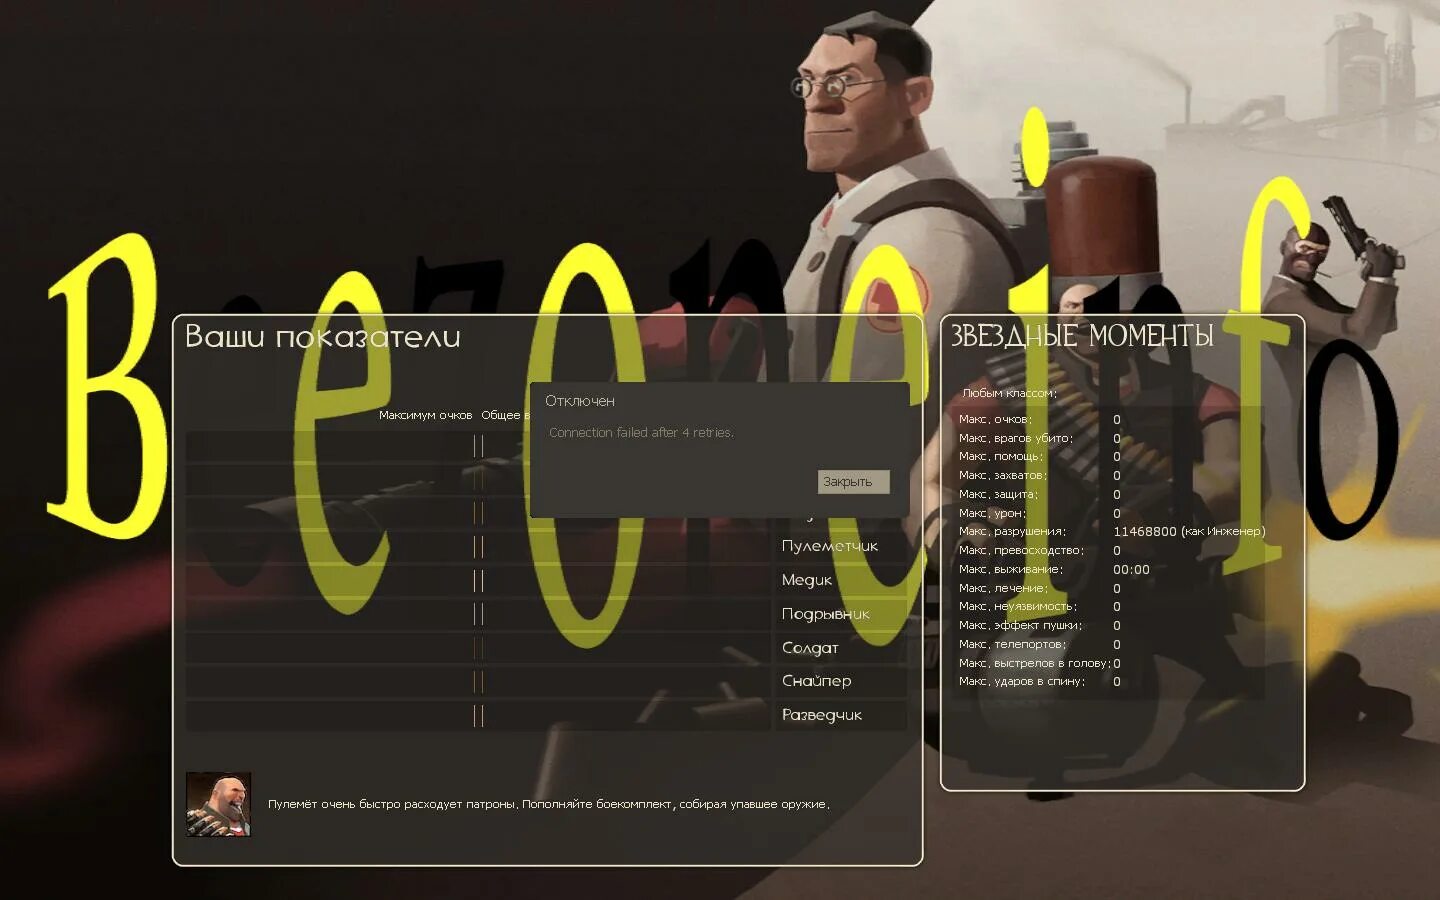 Connection failed after 4 retries. Connection failed after 4 retries tf2. Connection failed after 6 retries. Ошибка connection failed after 6 retries в Garry's Mod. Connection failed 4